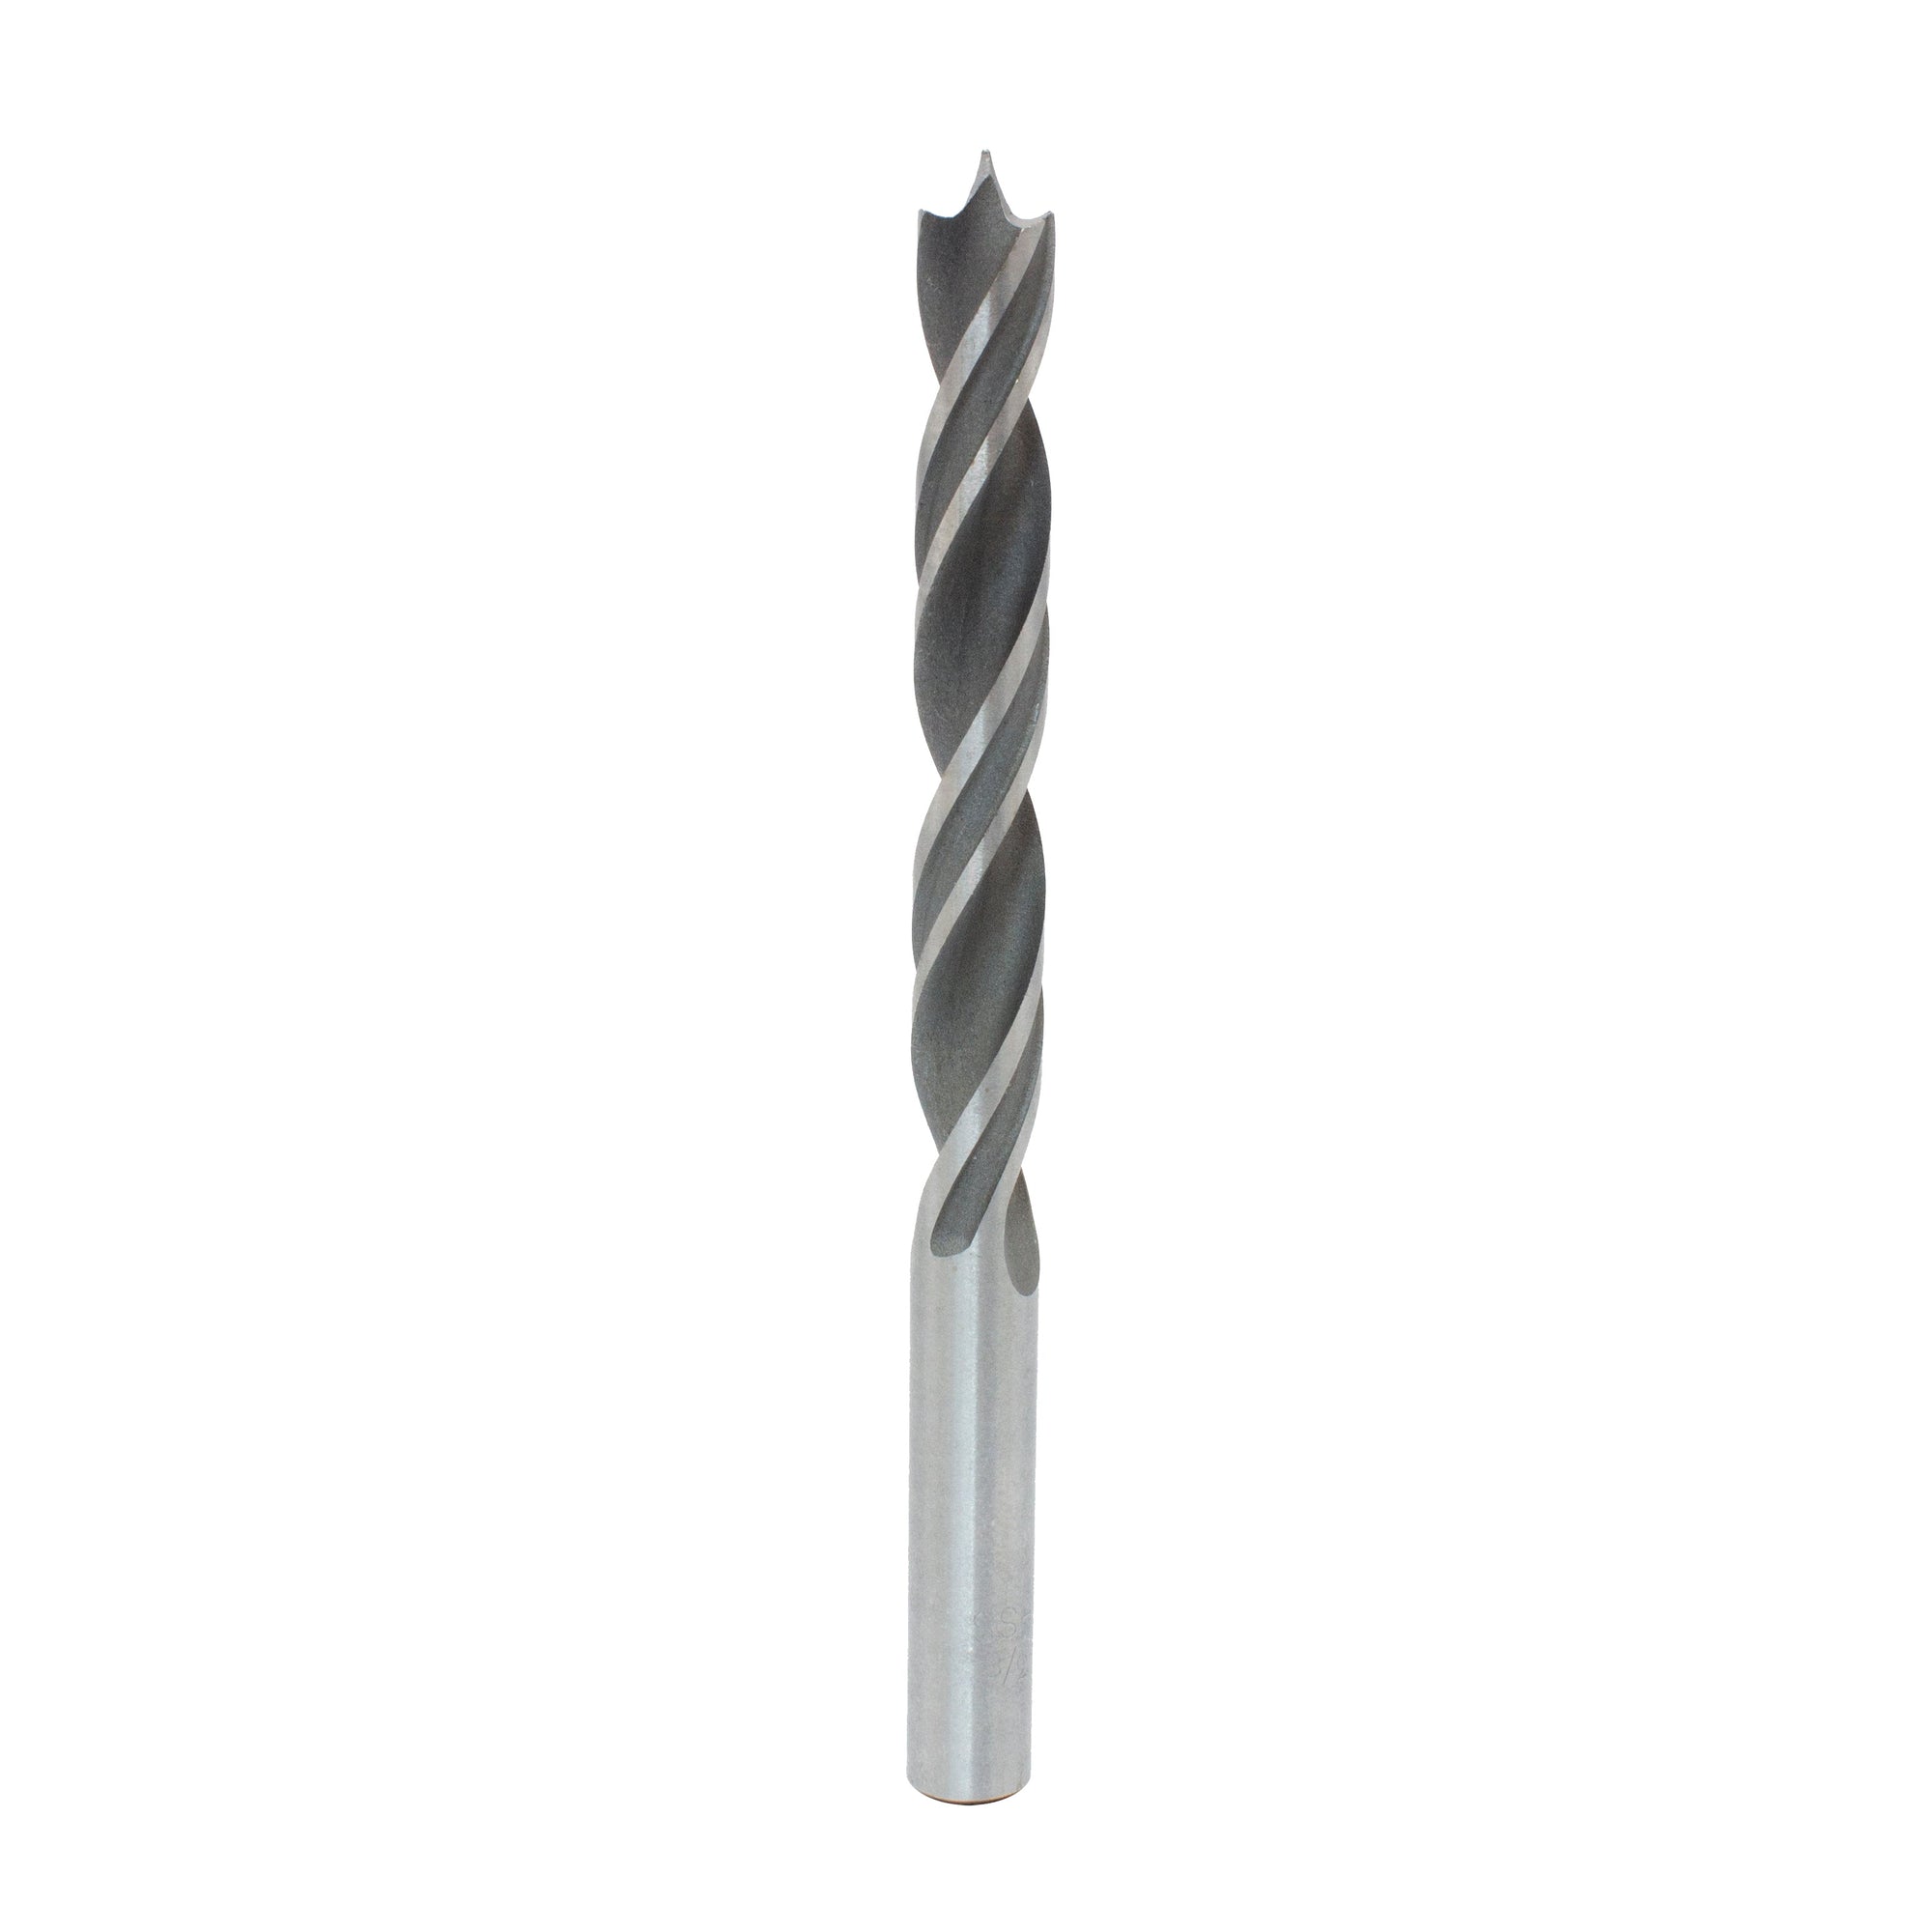 8mm Brad Point Drill Bit (used with our M5 Inserts for hardwood applications)